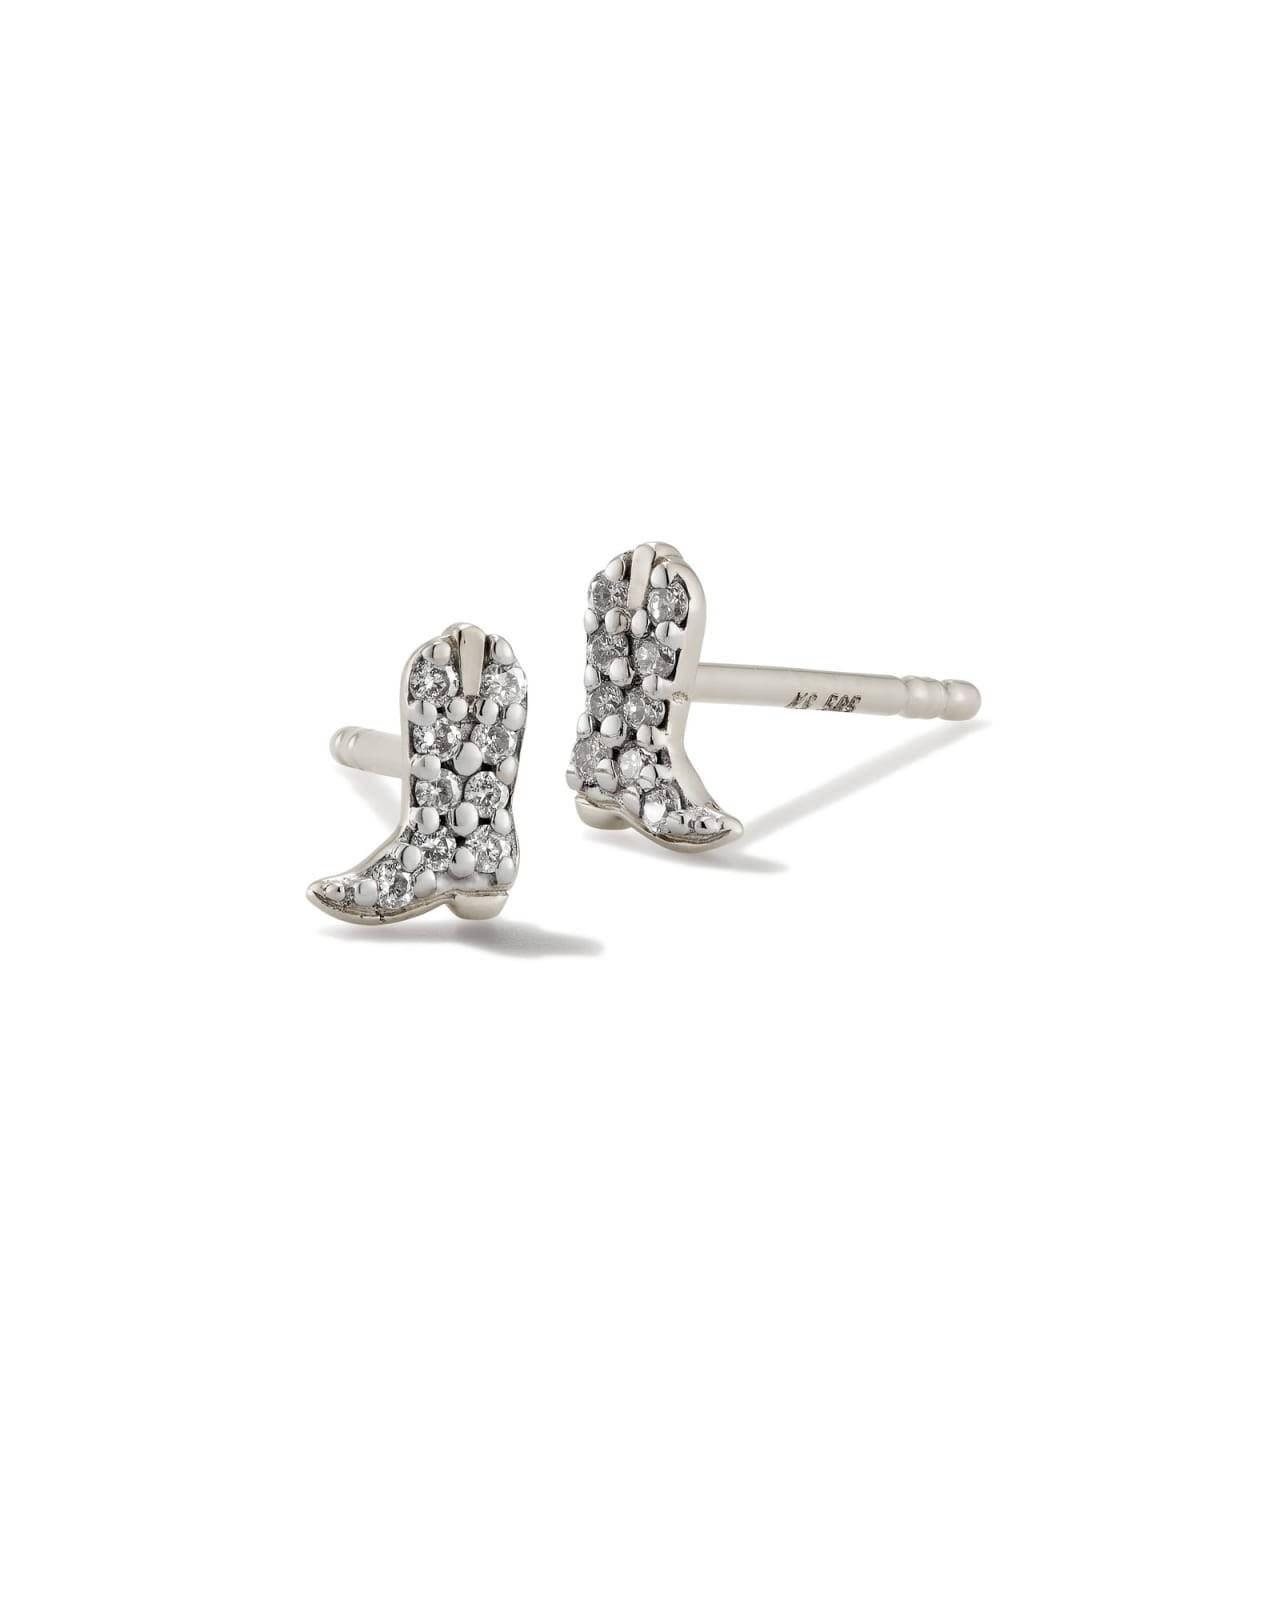 Tiny Cowboy Boot 14k White Gold Stud Earrings in White Diamond image number 0